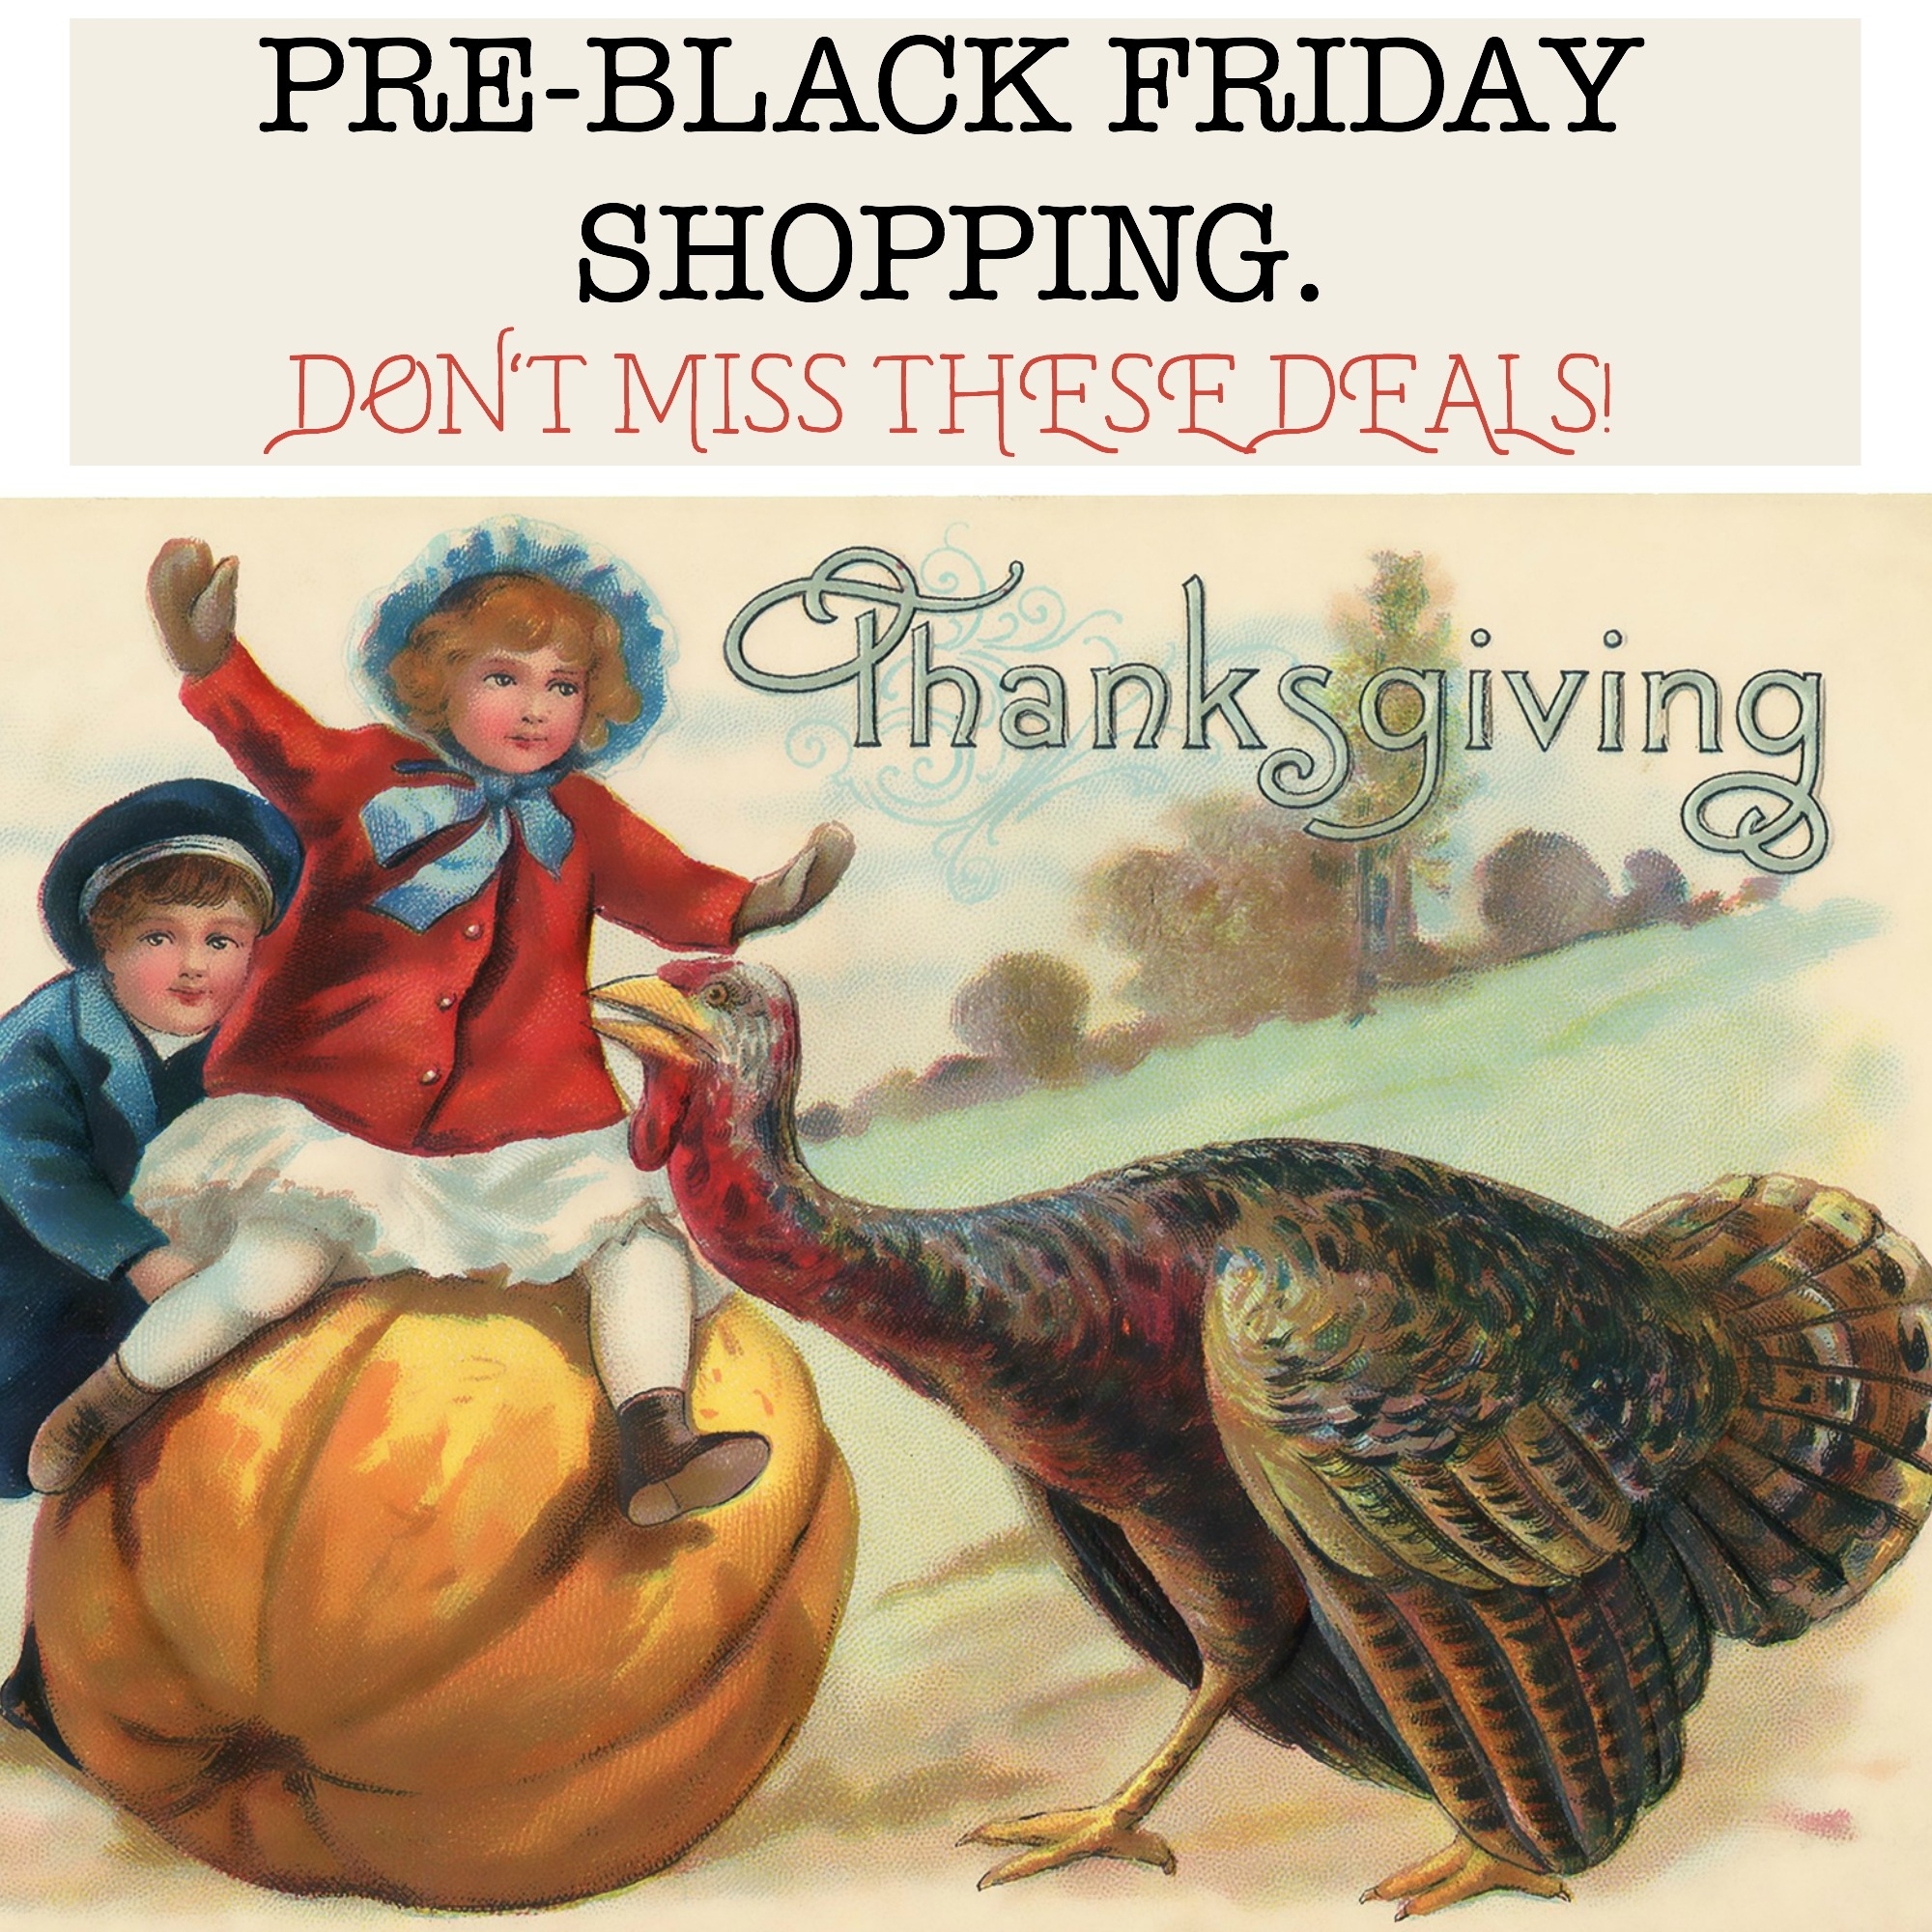 Pre-Black Friday shopping. Don't miss these deals!